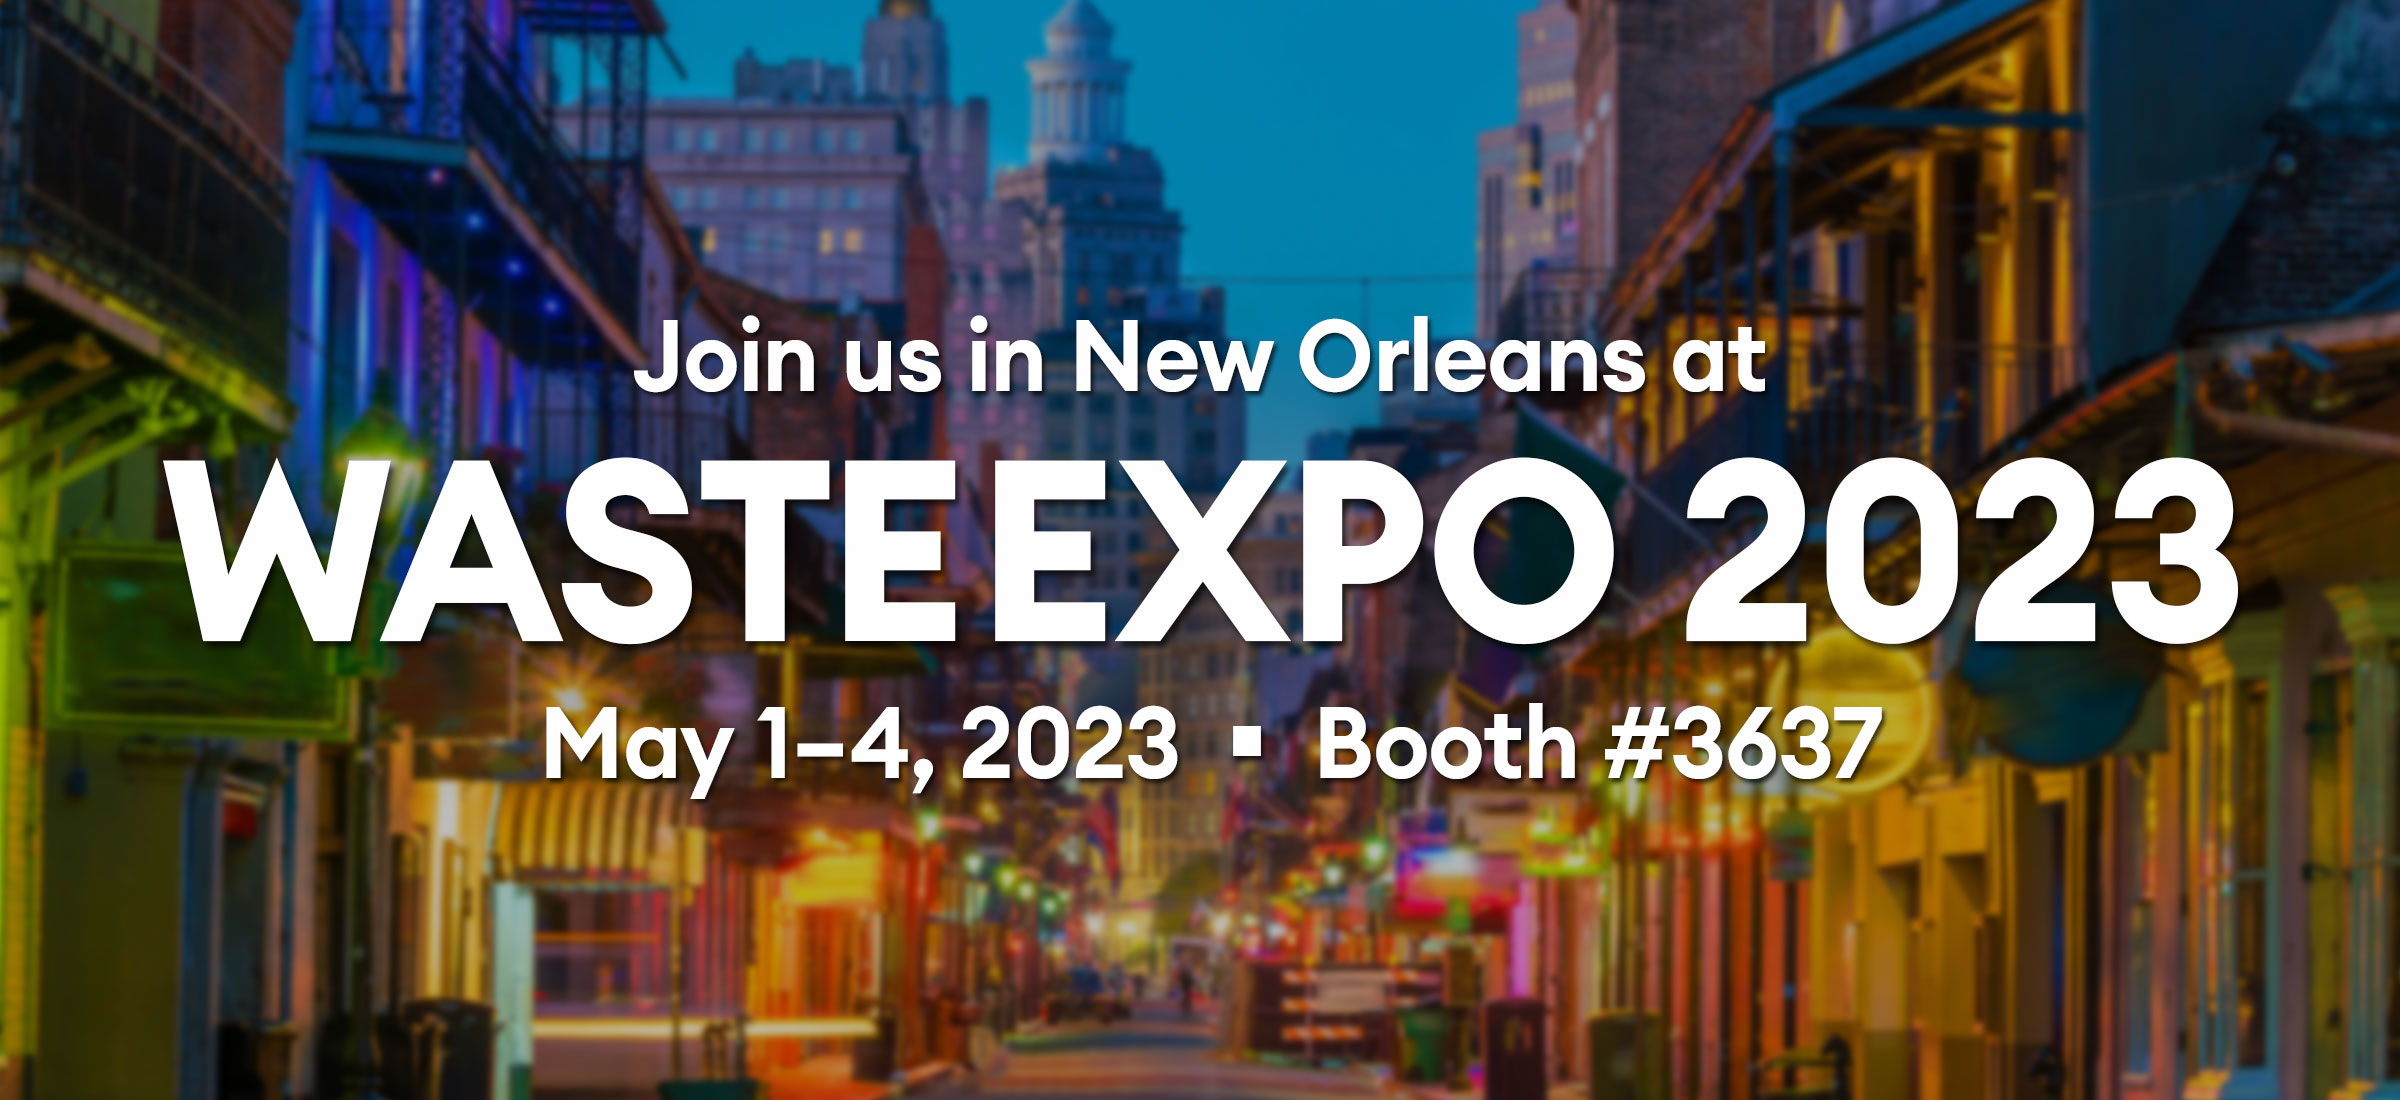 Join us in New Orleans at WasteExpo 2023 - May 1-4, 2023 - Booth #3637